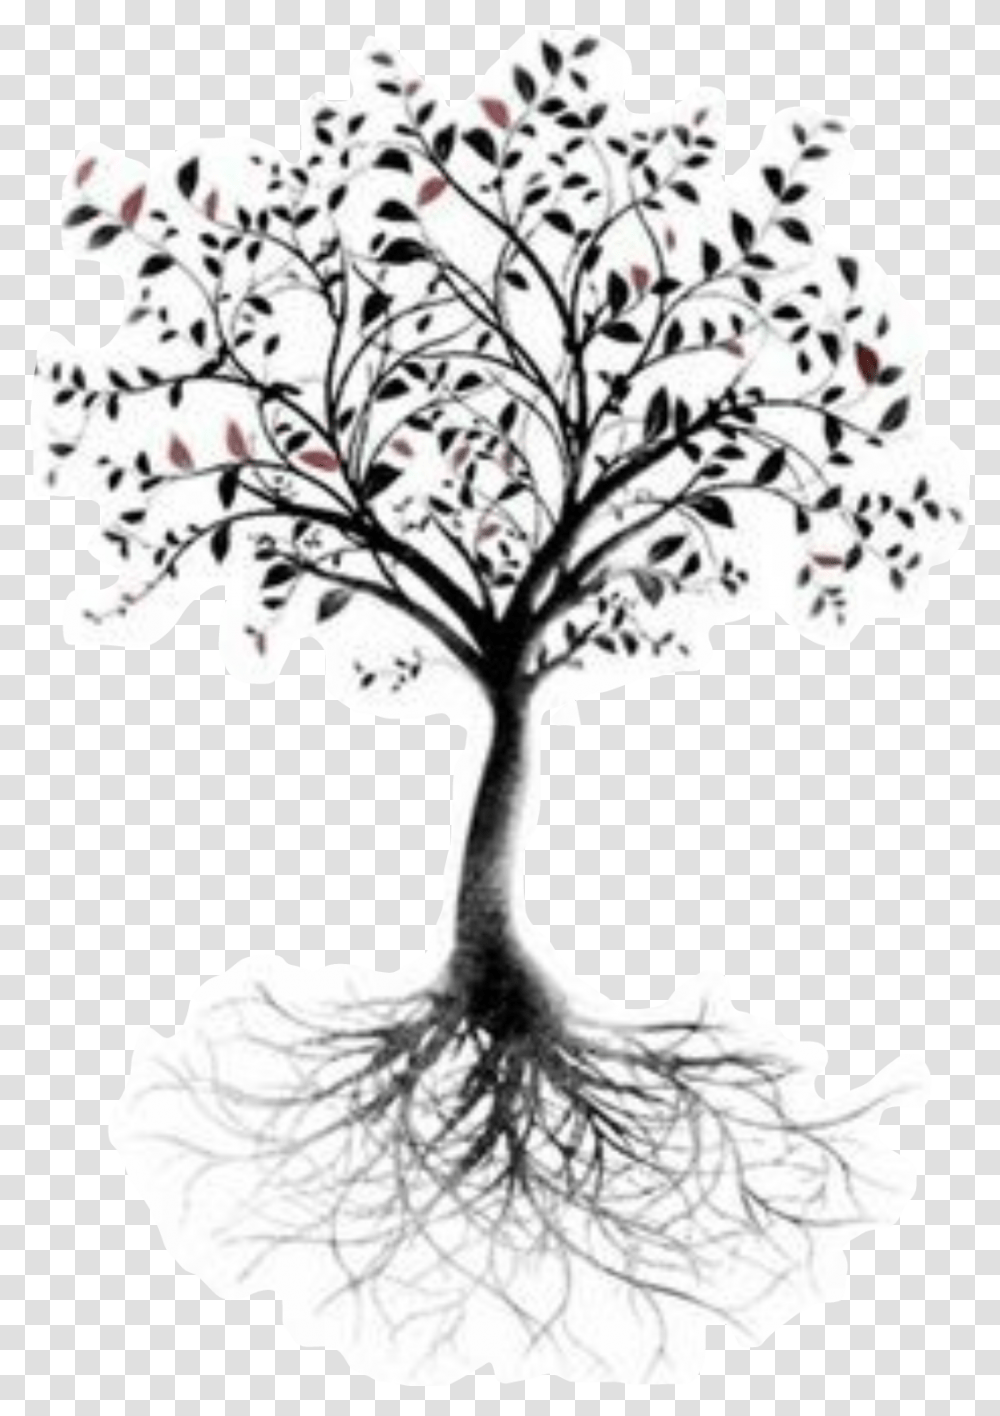 Tree Of Life Root Tattoo Branch Arbre Noir Et Blanc, Plant, Flower, Blossom, Panther Transparent Png